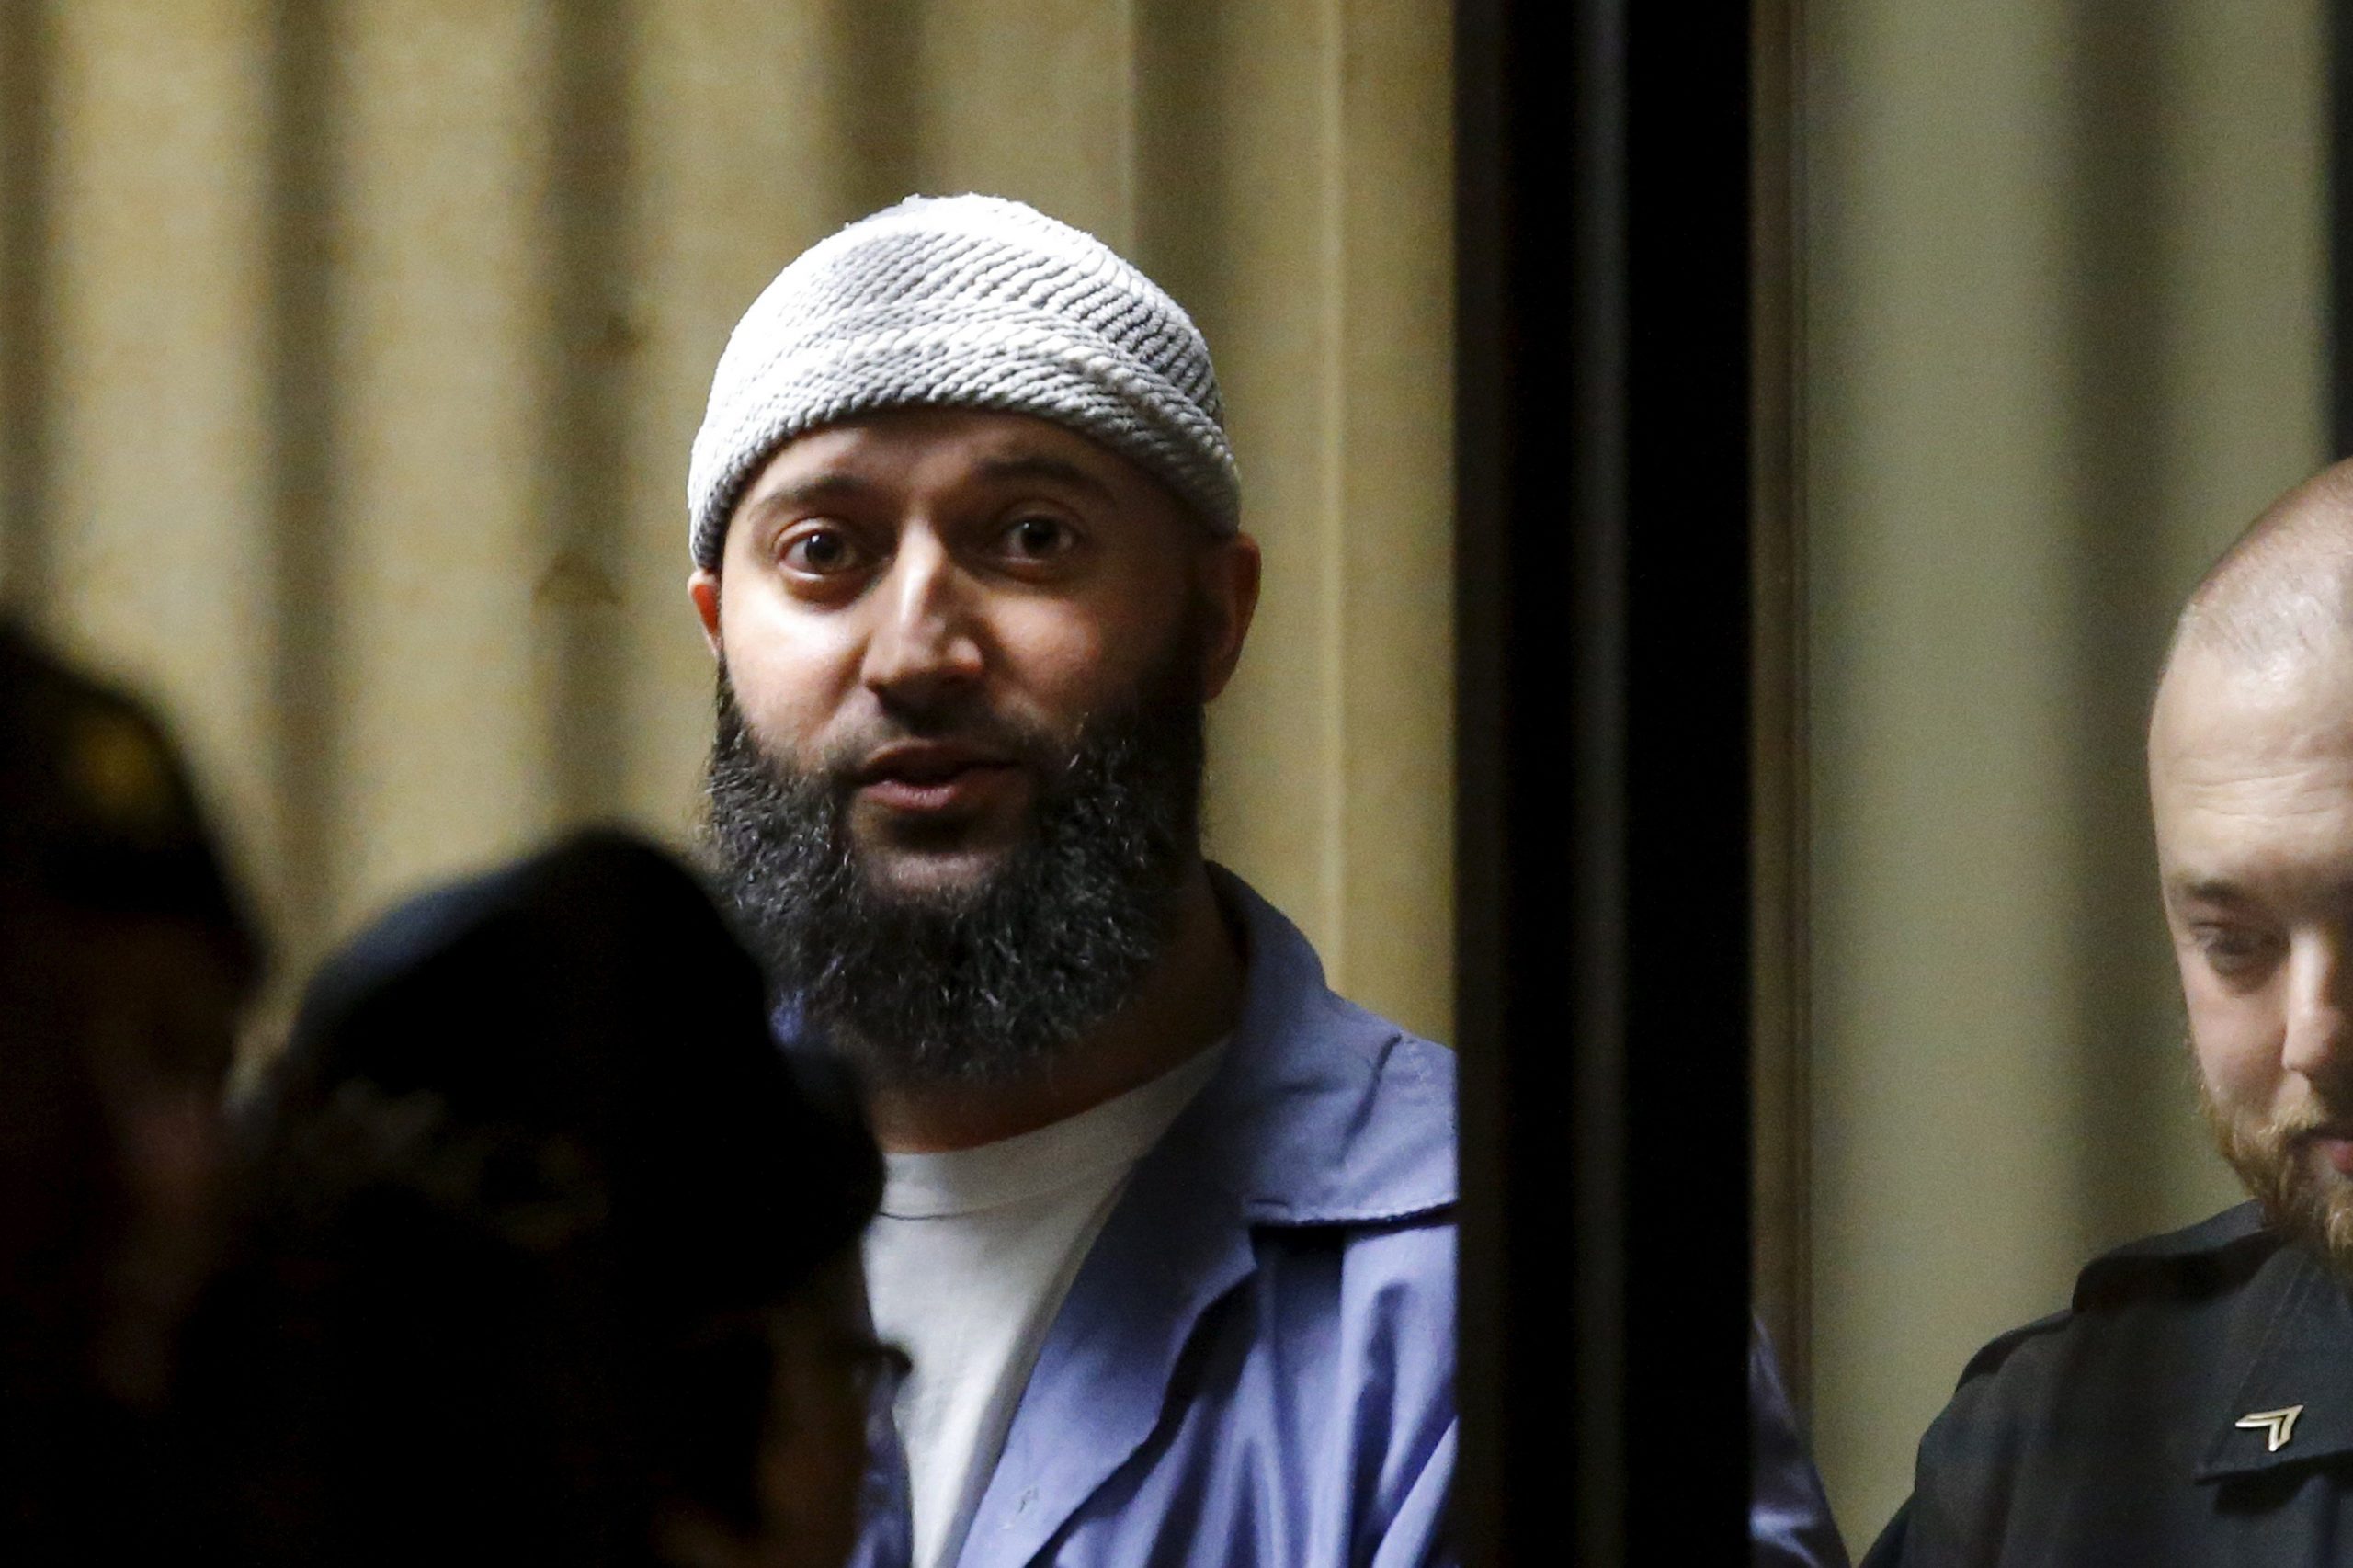 Adnan Syed case: All about other suspects in Hae Min Lee’s murder